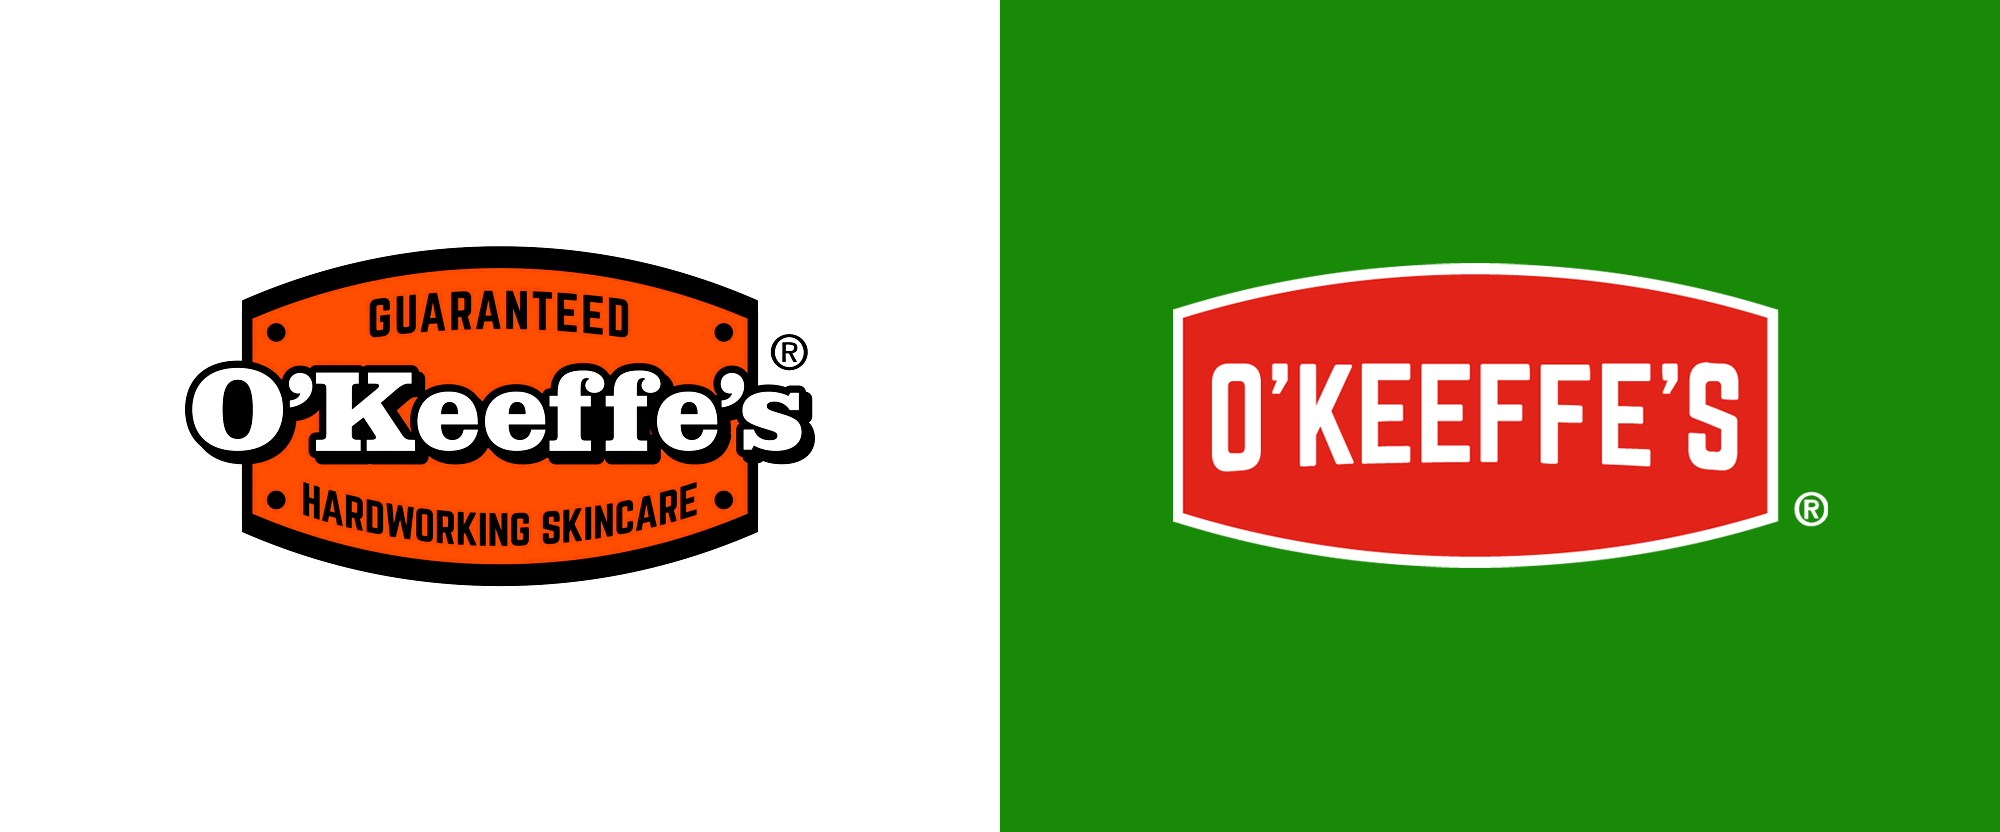 New Logo and Packaging for O'Keefe's